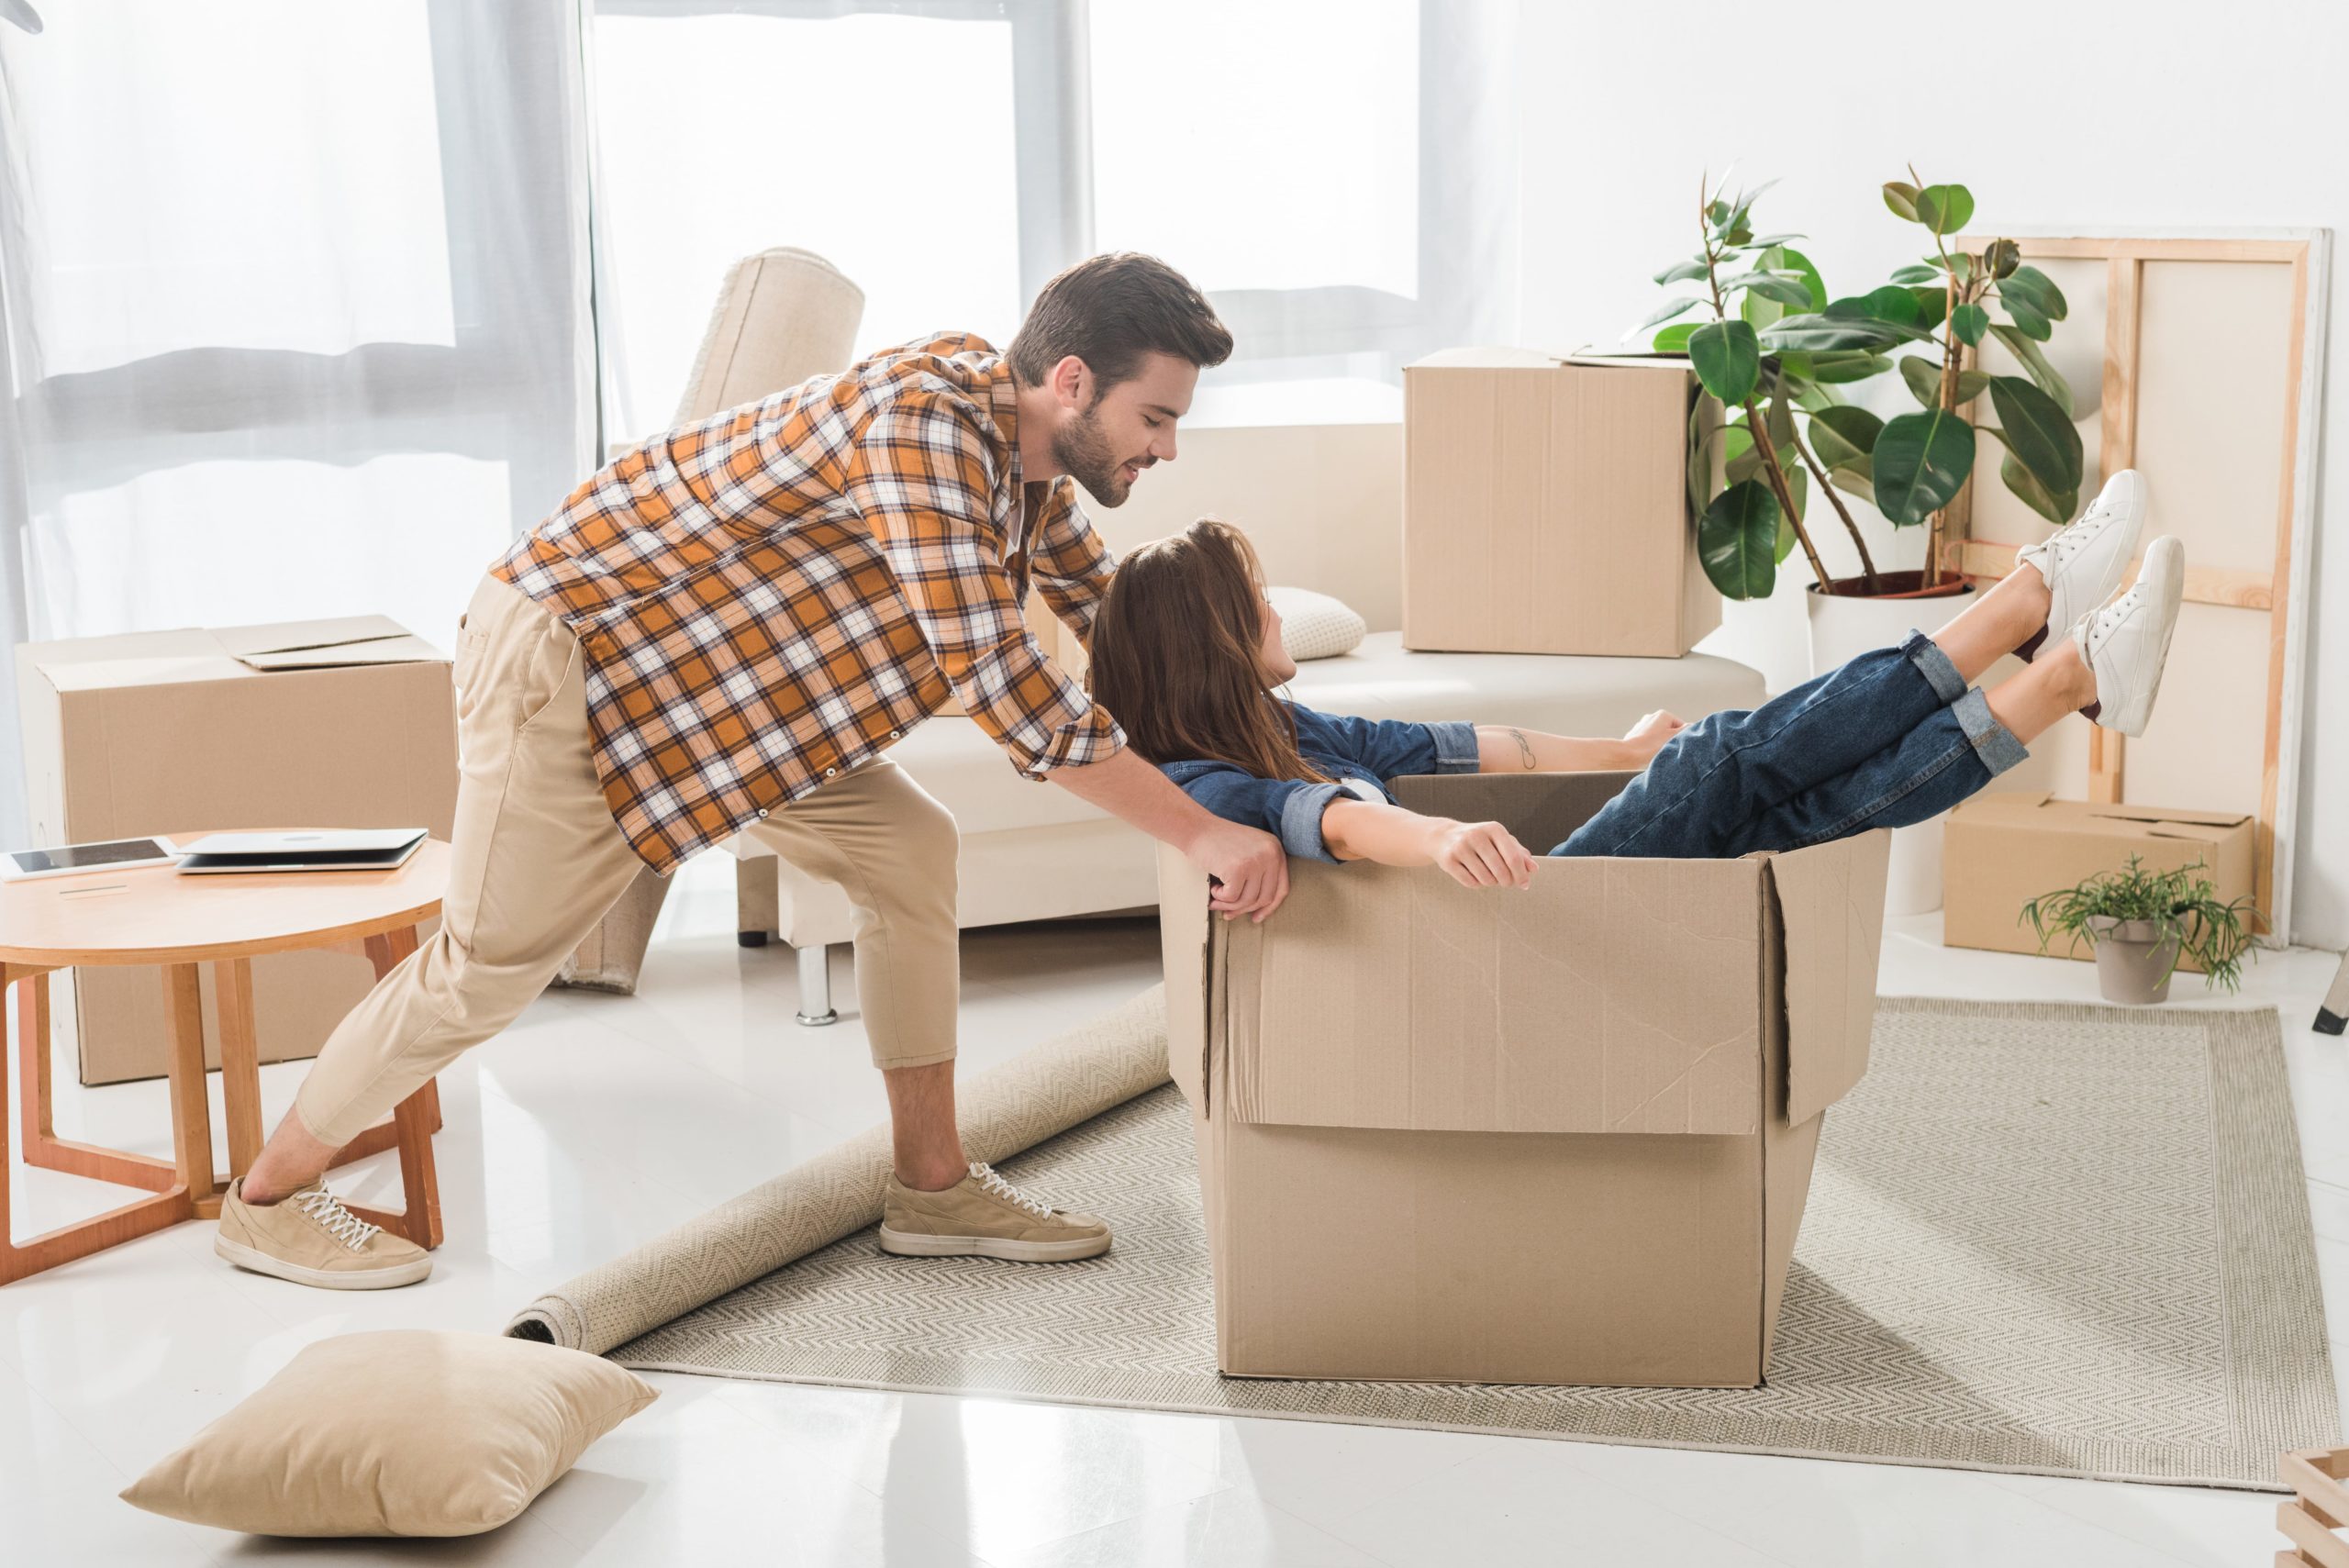 Sideview of couple having fun in new home while unpacking